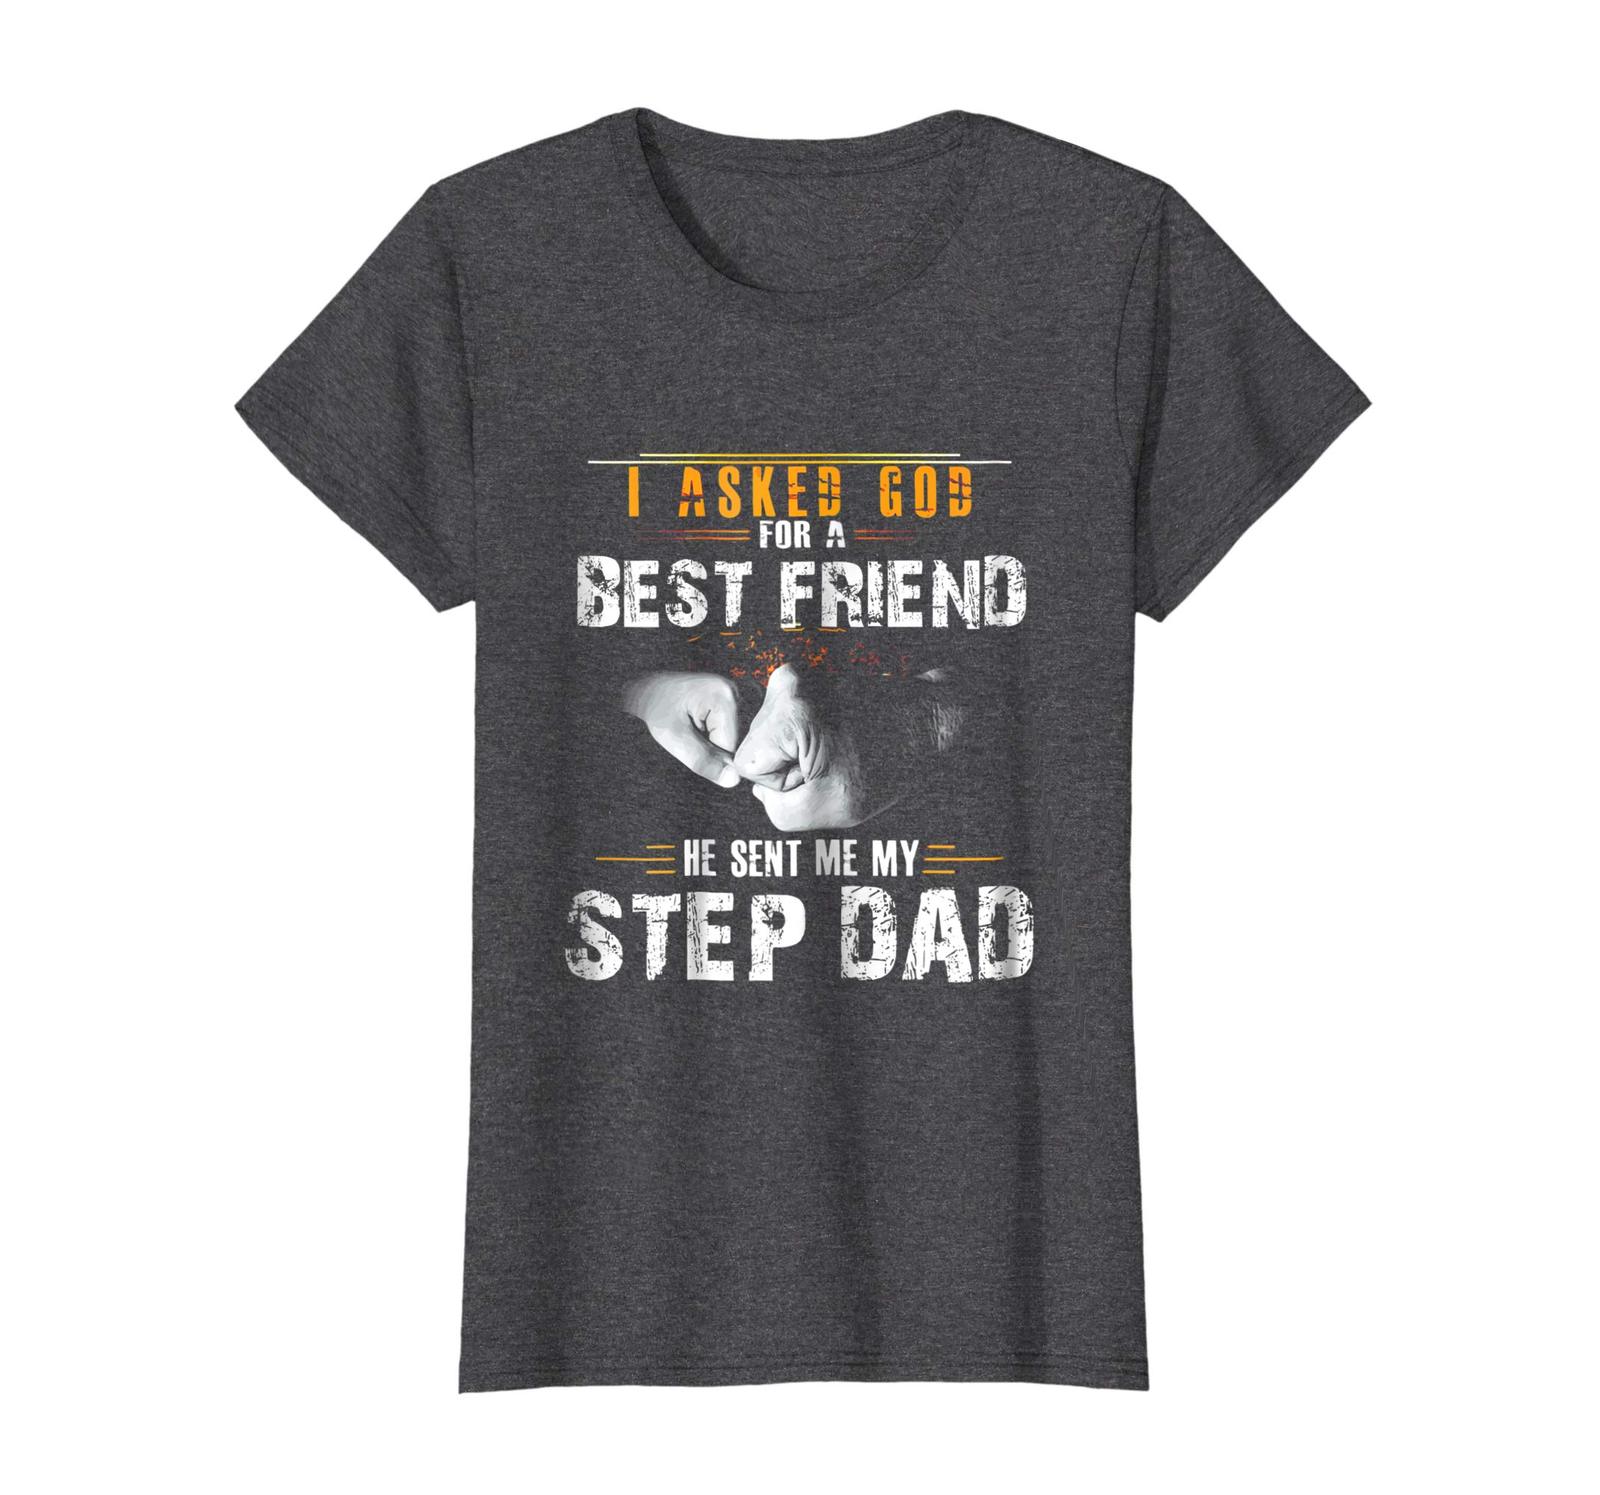 Dog Fashion - I Asked God For A Best Friend He Sent me My Step Dad T-Shirt Wowen